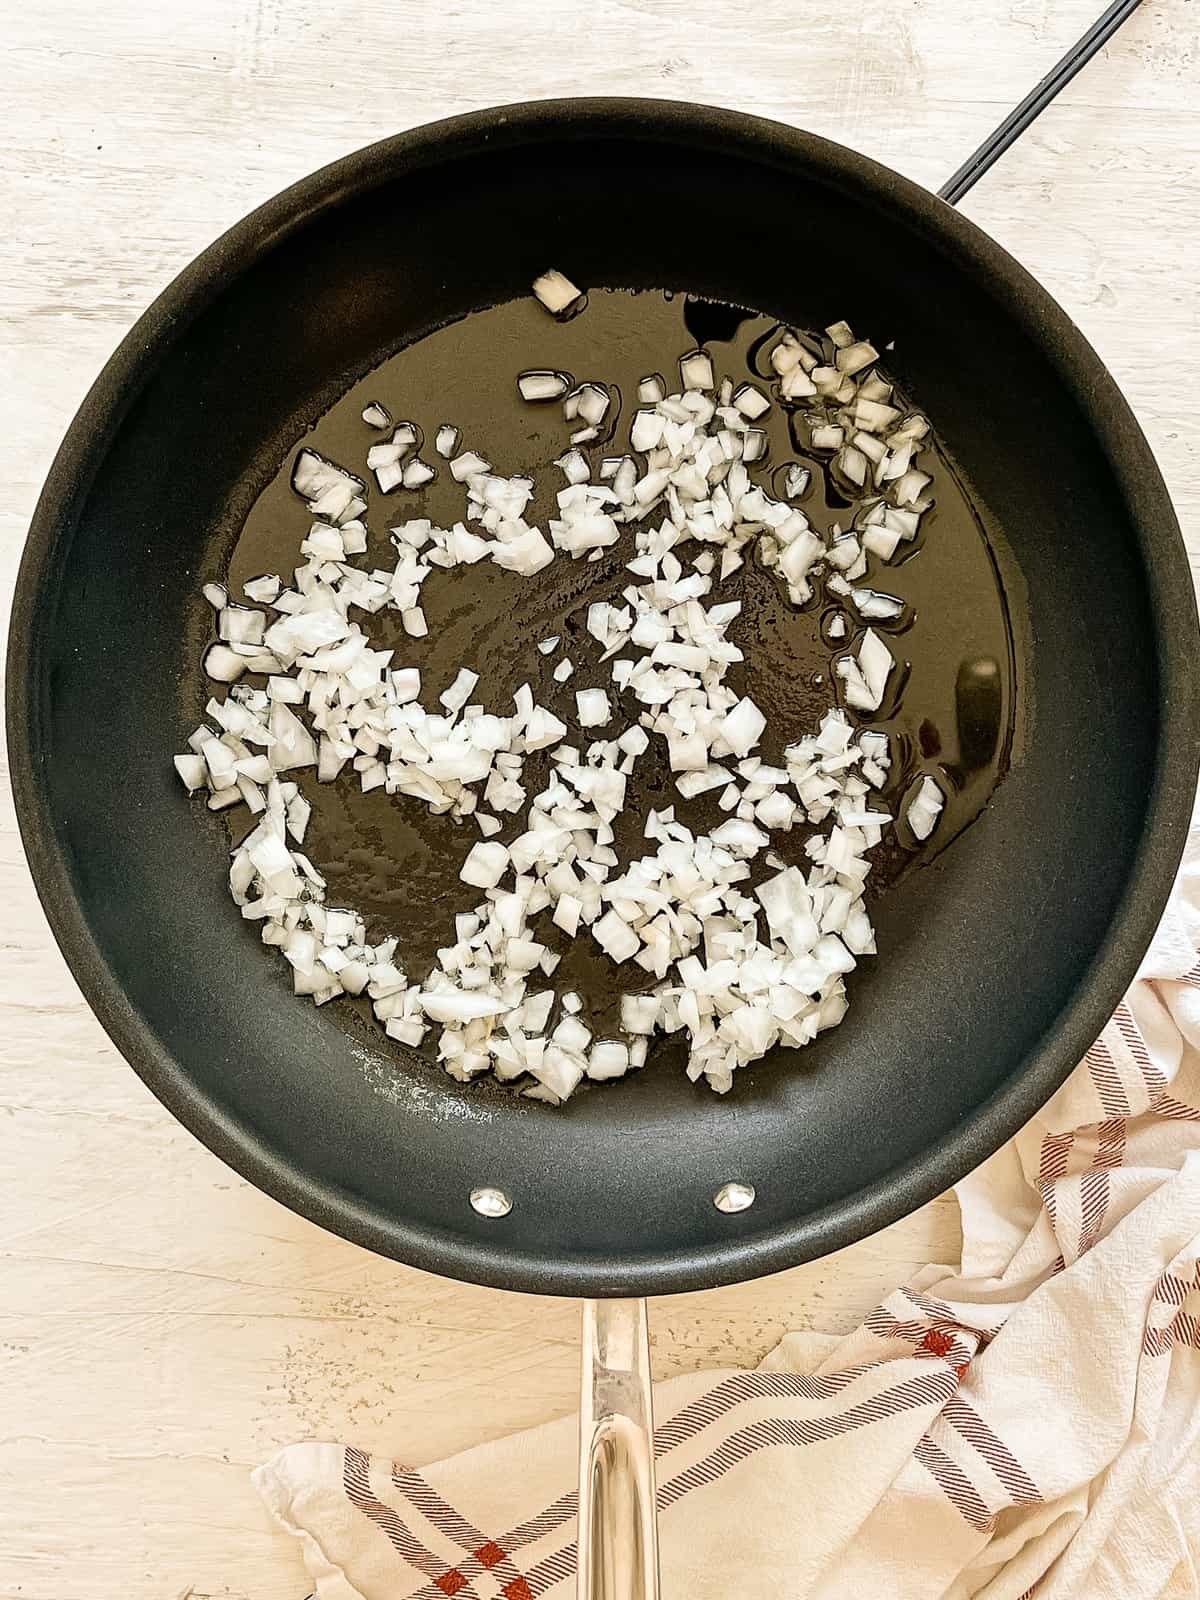 Diced onion sauteing in a black skillet.